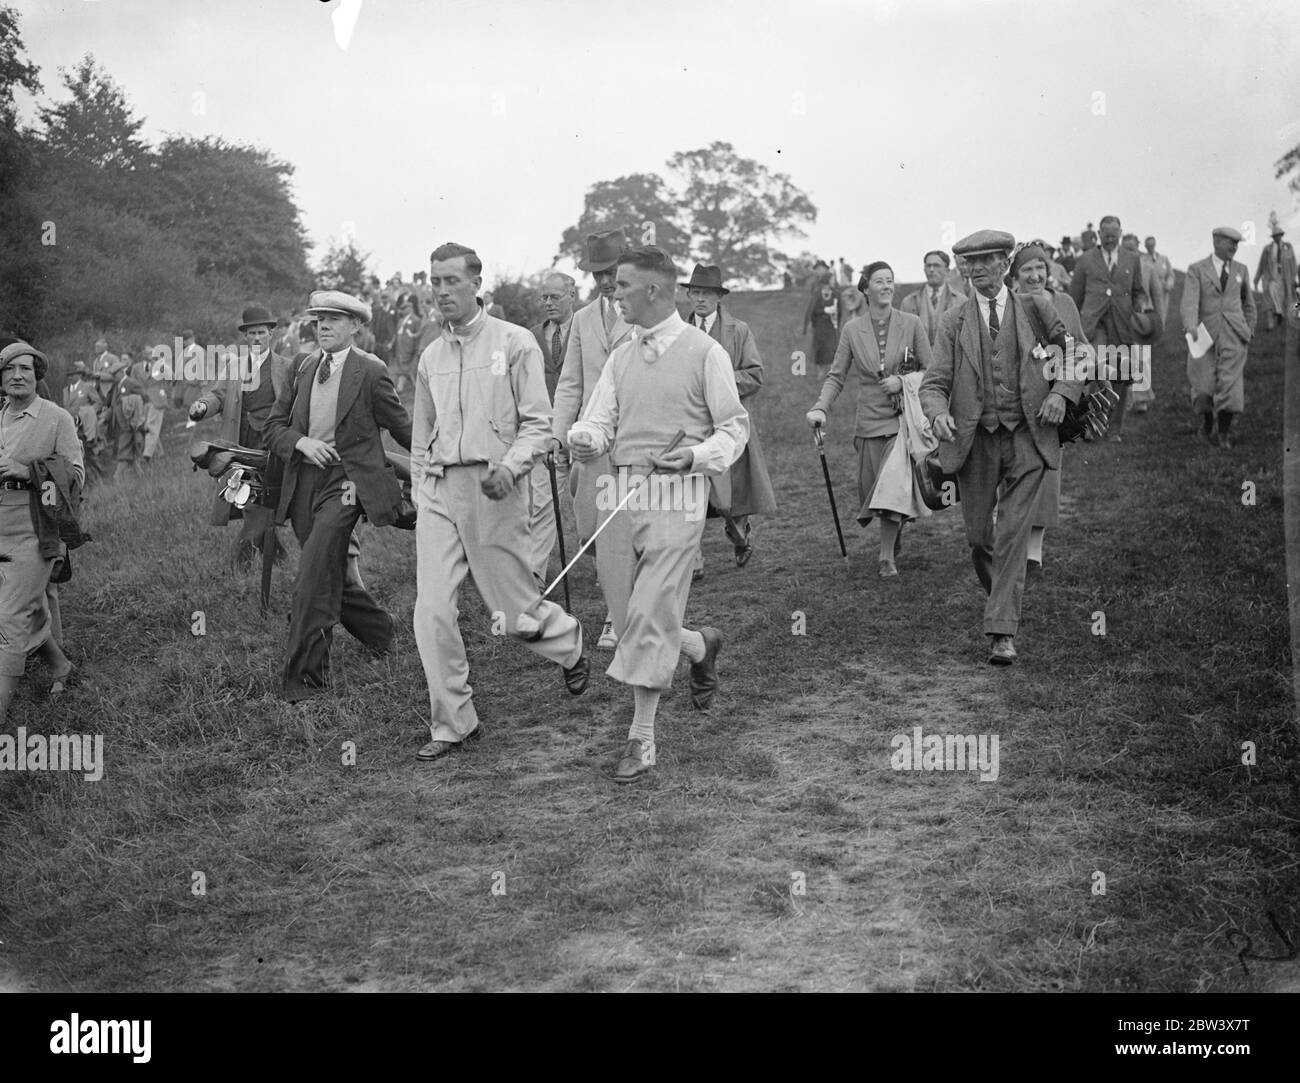 American competitor in big professional golf tournament . Leading golfers are competing in the professional matchplay championships worth Â£1250 at Oxhey , Herts . Photo shows , A H Pagden of Sundridge Park, last year's winner , left and his opponents K Williams ( Dinas Powis ) walking from the 3 tee . 15 September 1936 Stock Photo